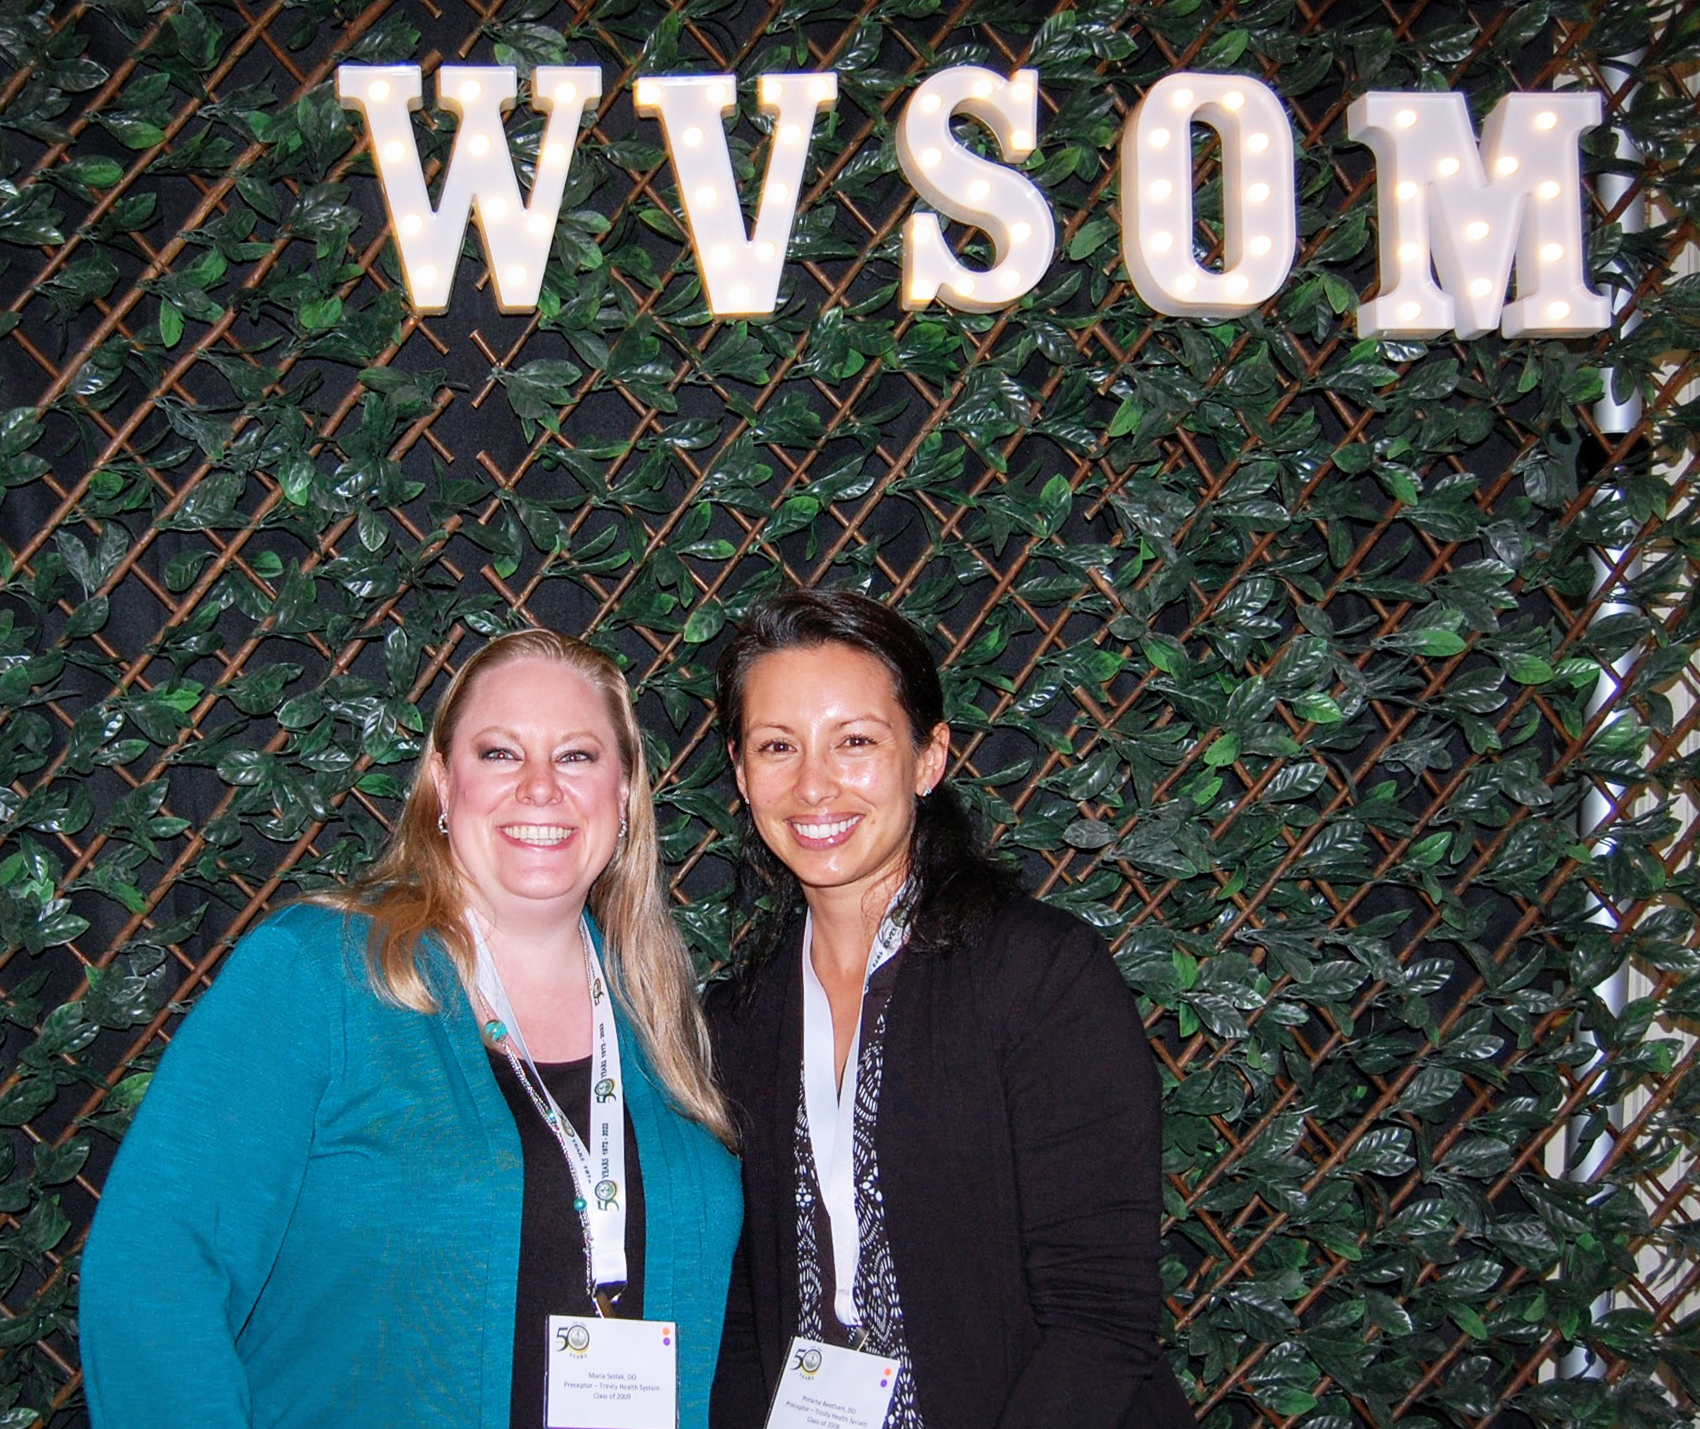 Two women pose for camera under WVSOM light sign, names on tags not visible